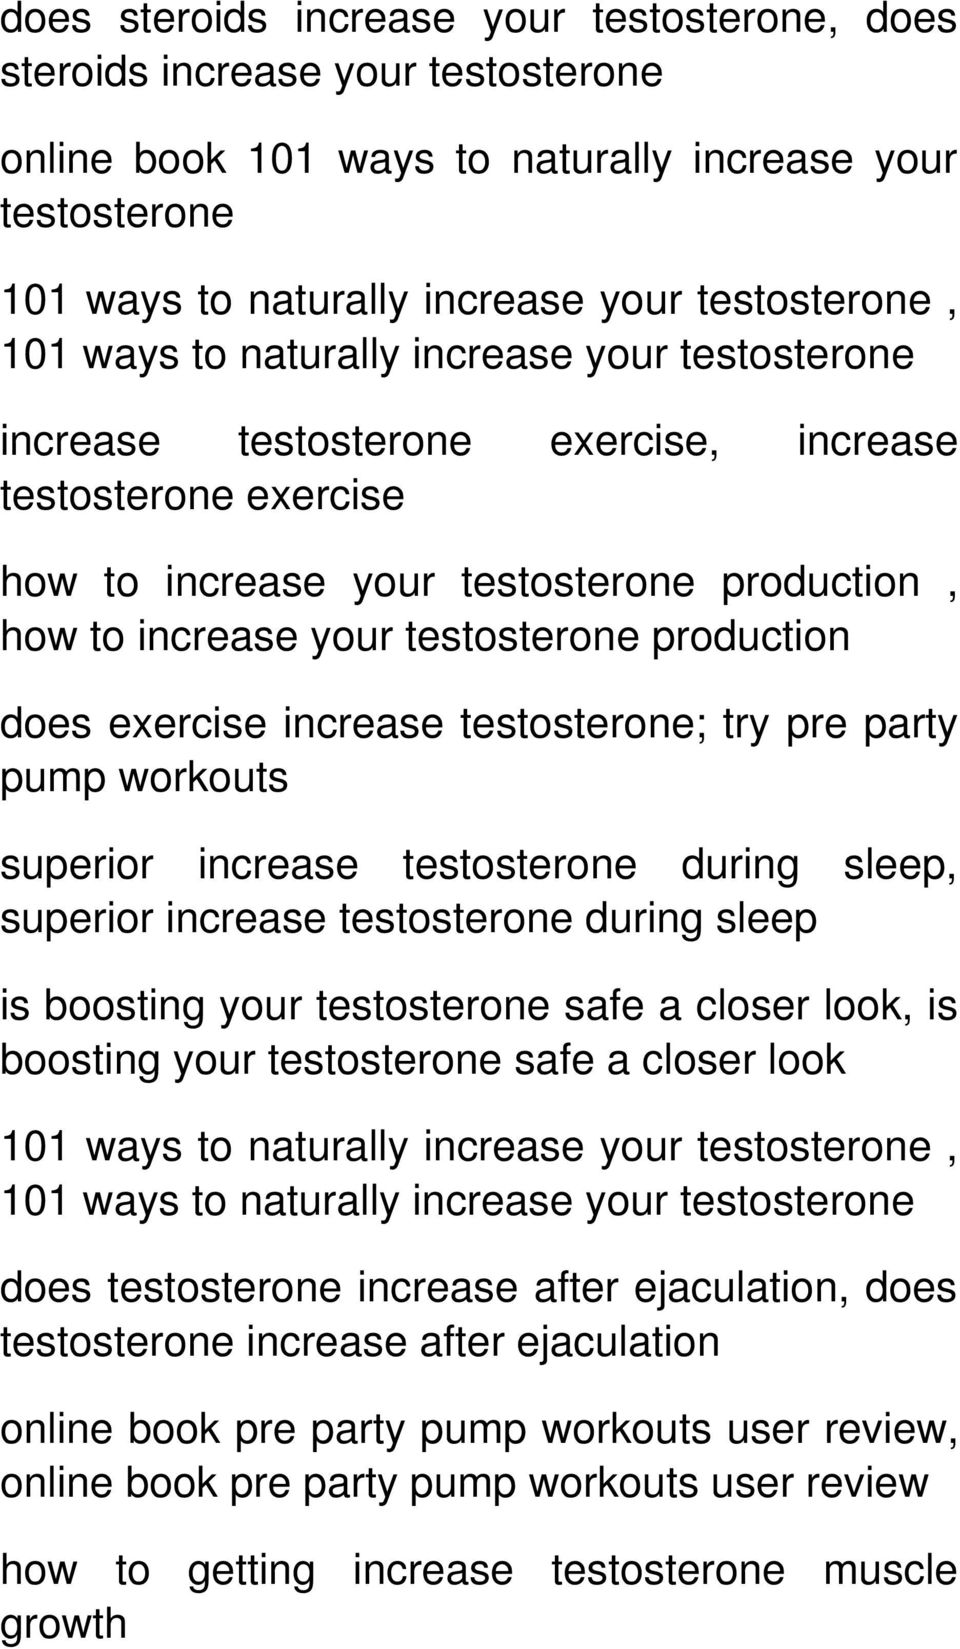 does exercise increase testosterone; try pre party pump workouts superior increase testosterone during sleep, superior increase testosterone during sleep is boosting your testosterone safe a closer